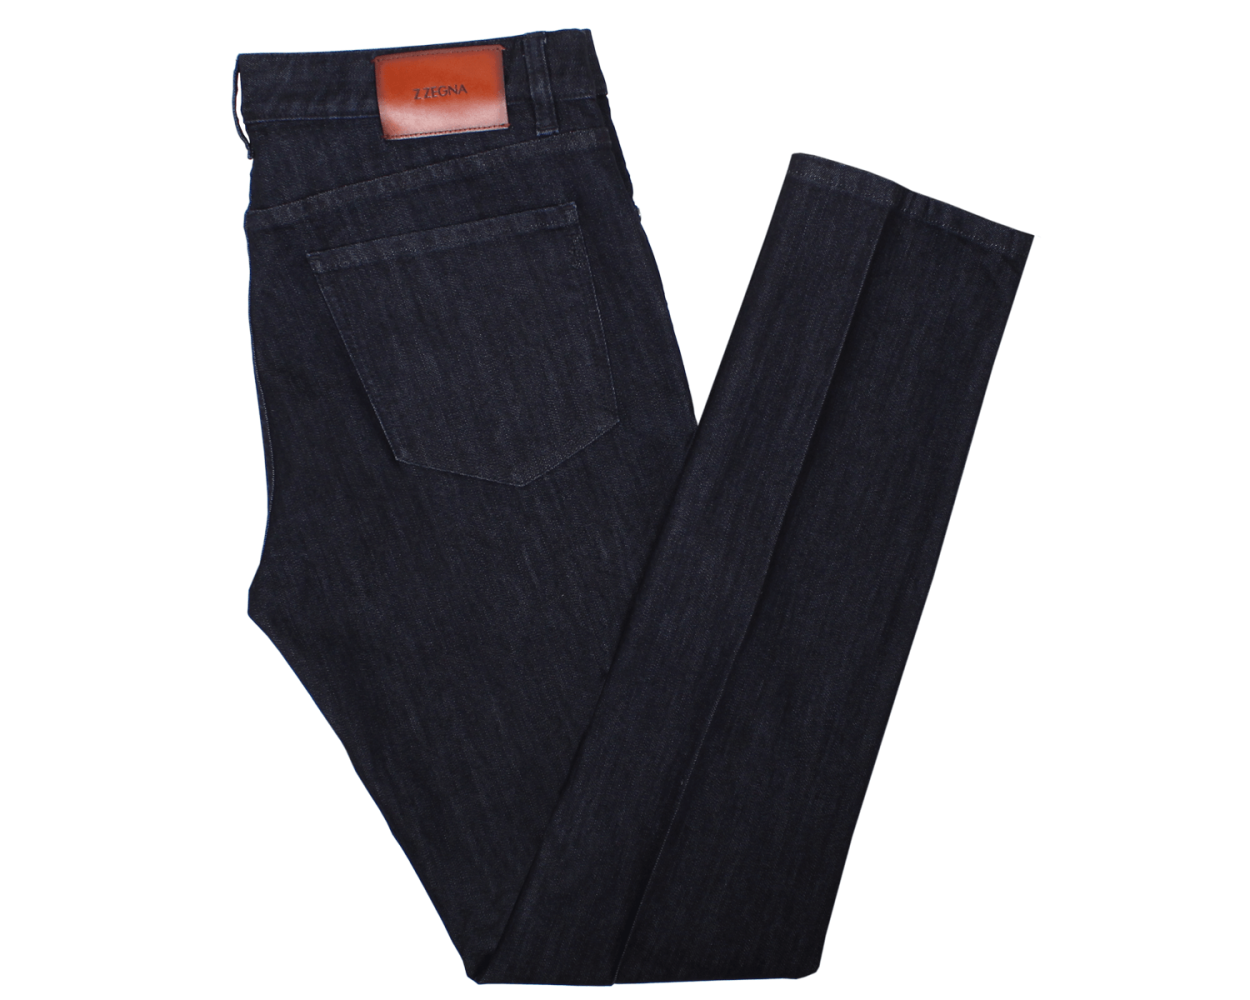 Regular Fit Party Wear Z Black Denim Jeans at Rs 410/piece in New Delhi |  ID: 22879547233